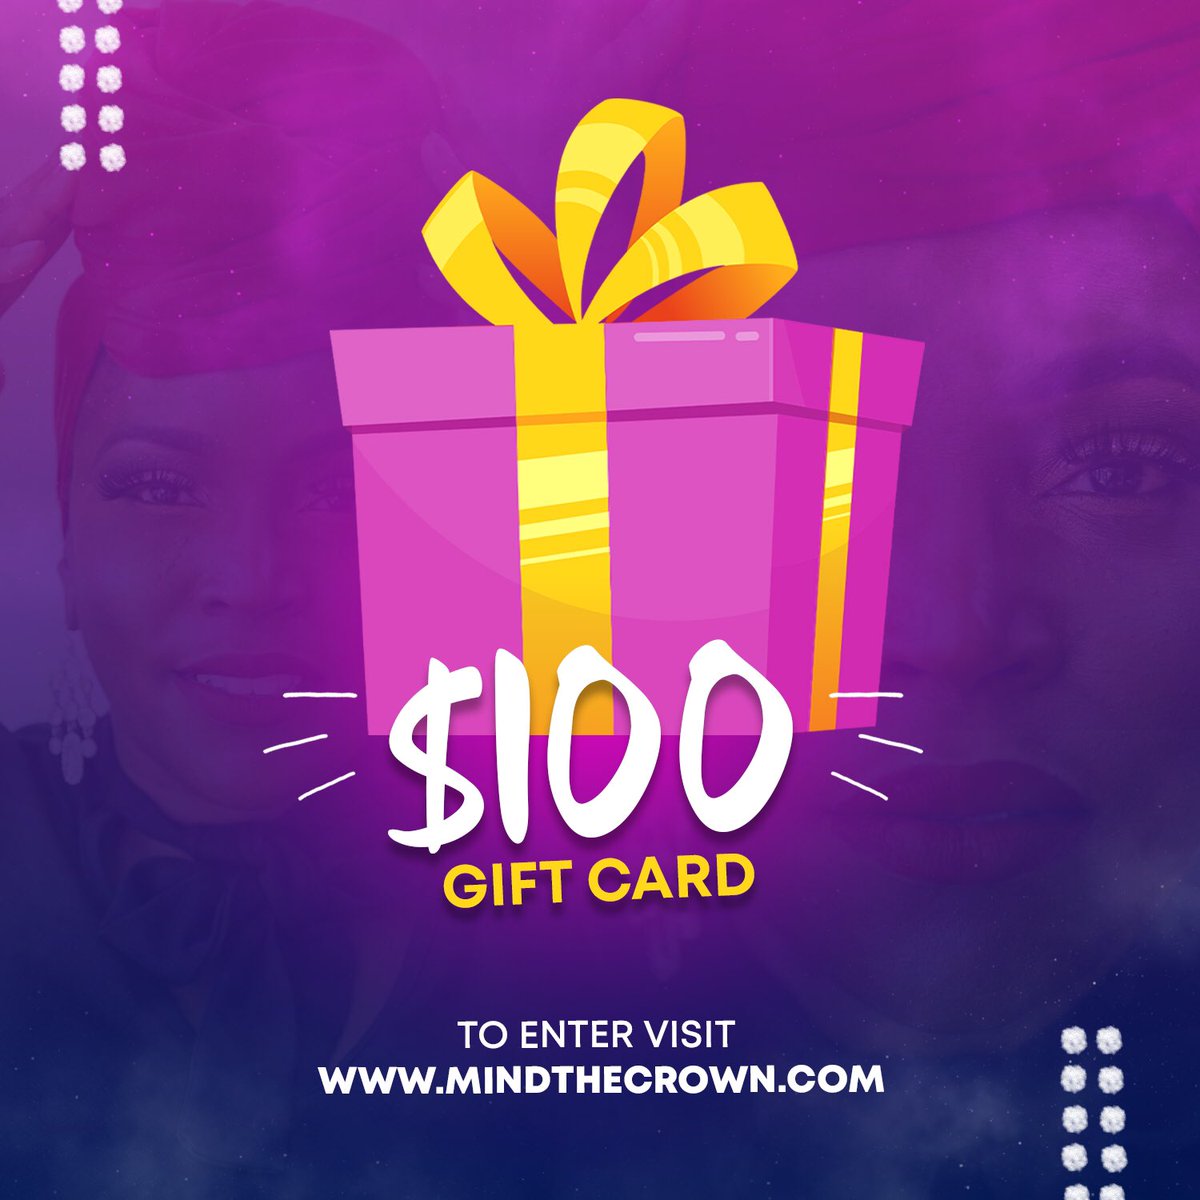 15 days left until the $100 Gift Card giveaway ends. To enter go to mindthecrown.com and click Giveaway Entry. 

#mindthecrown #giveawaycontest #giftcards